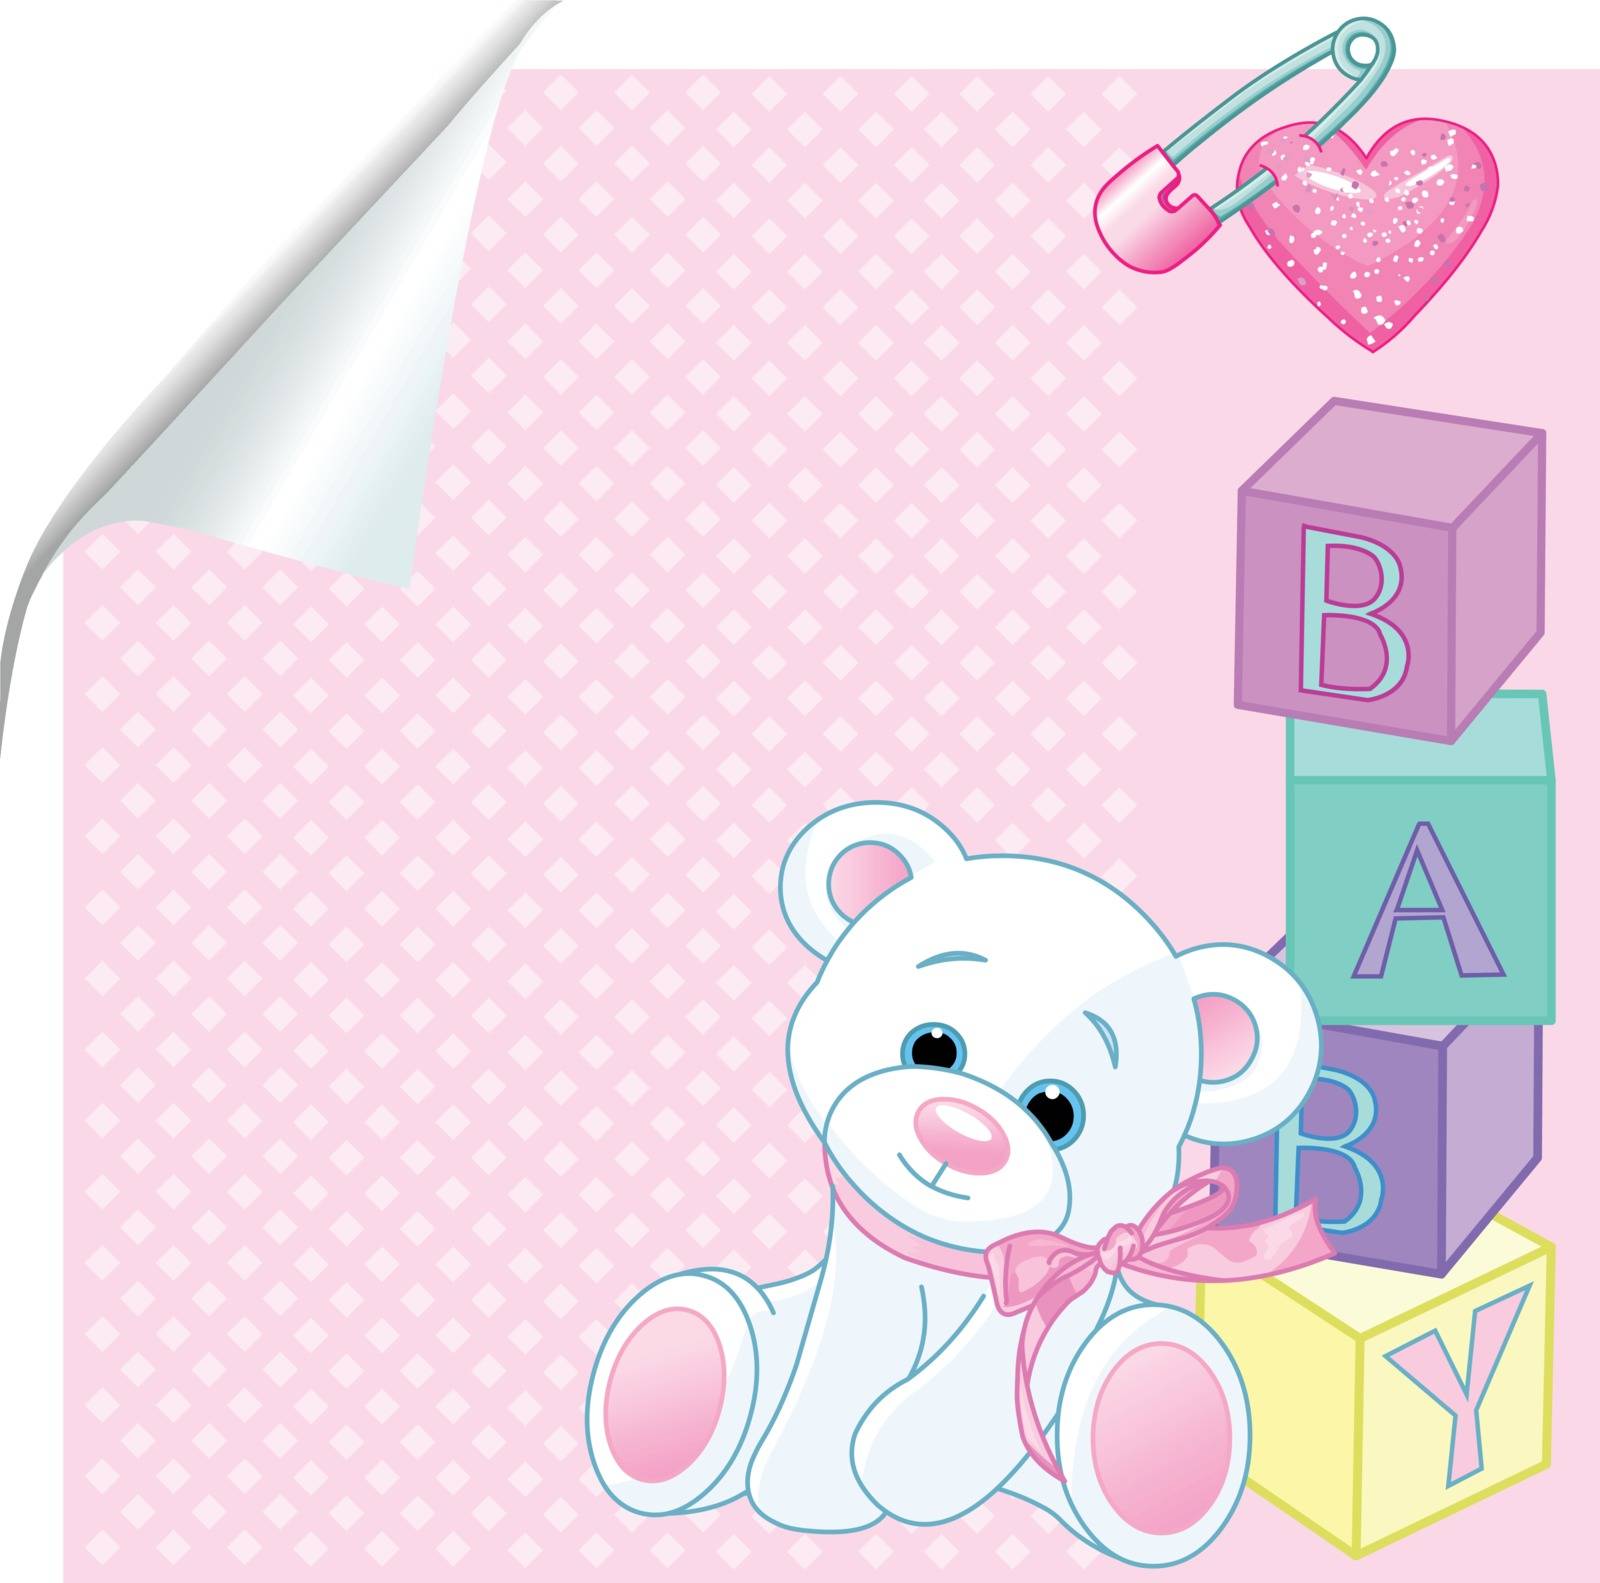 Pink pattern with Teddy Bear and word "baby" spelled out by blocks